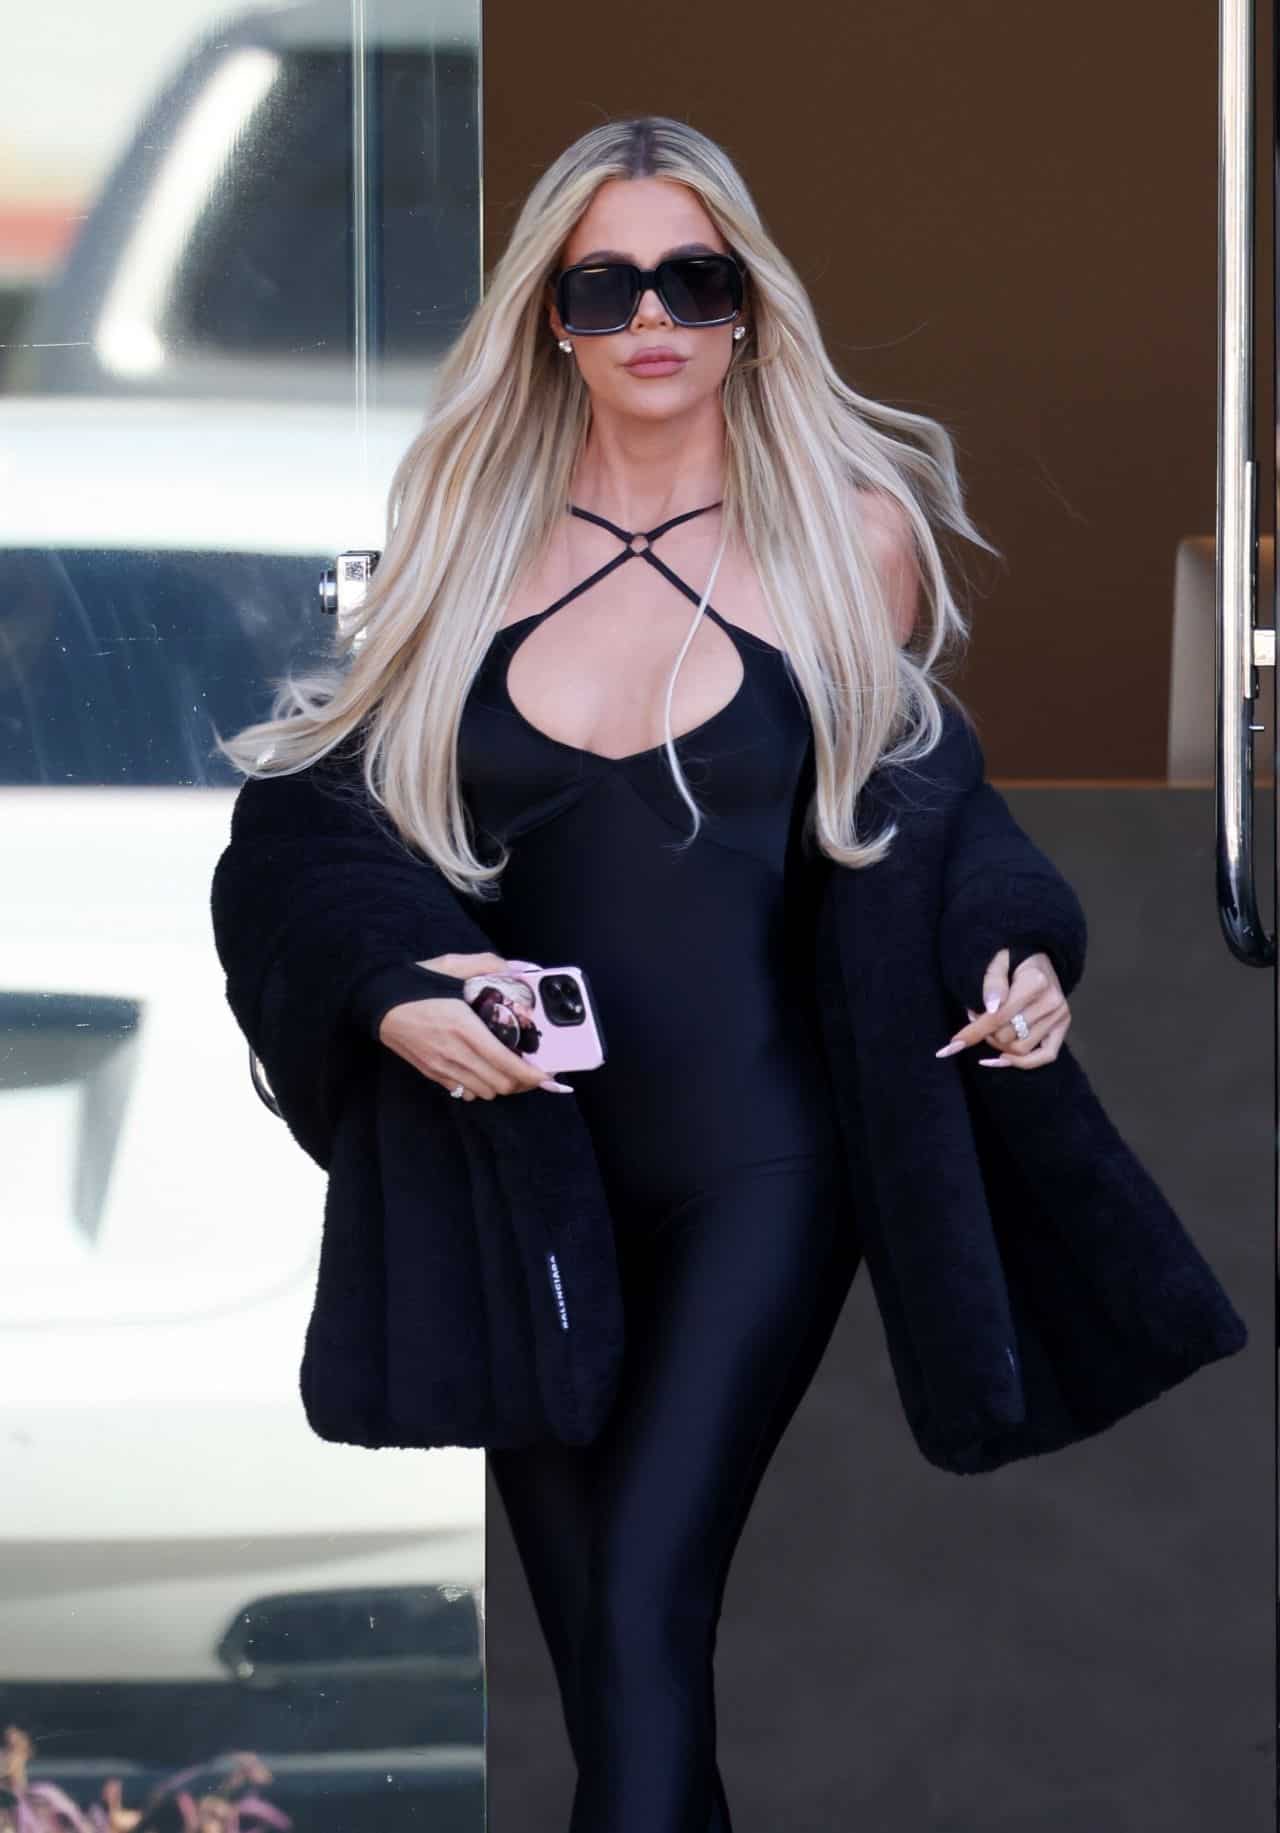 Khloe Kardashian Shows Off her Slim Figure in a Black Catsuit and Fur Coat